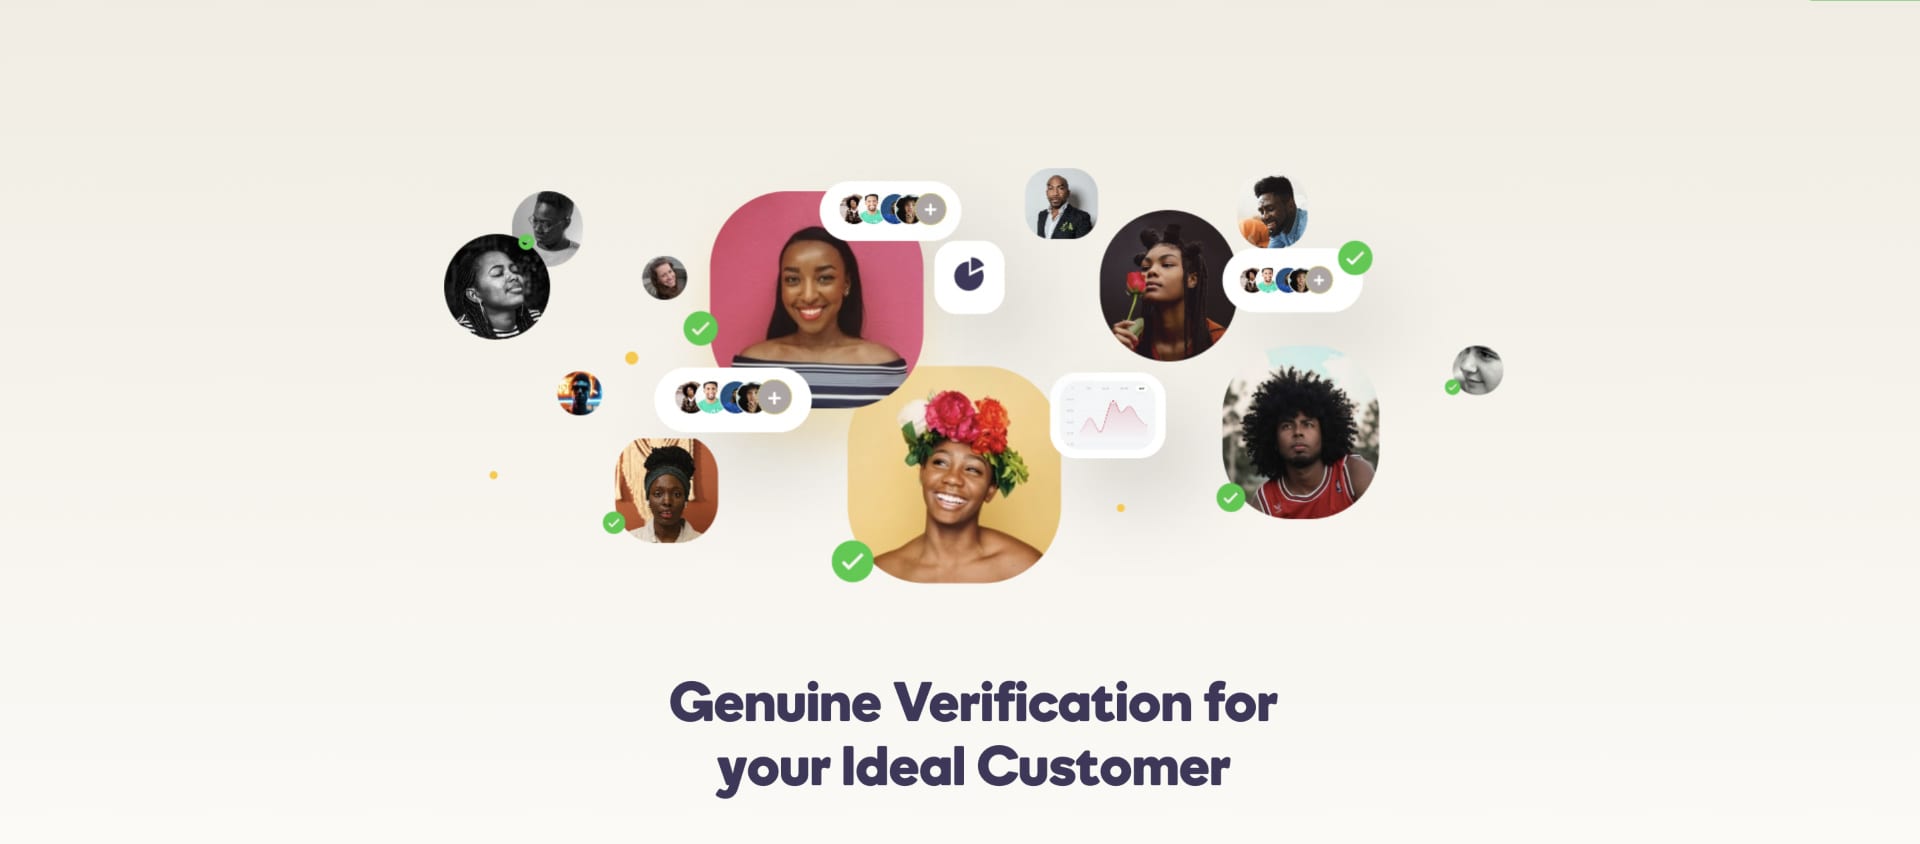 Verified.Africa, an identity verification startup has expanded to Kenya, Ghana and South Africa